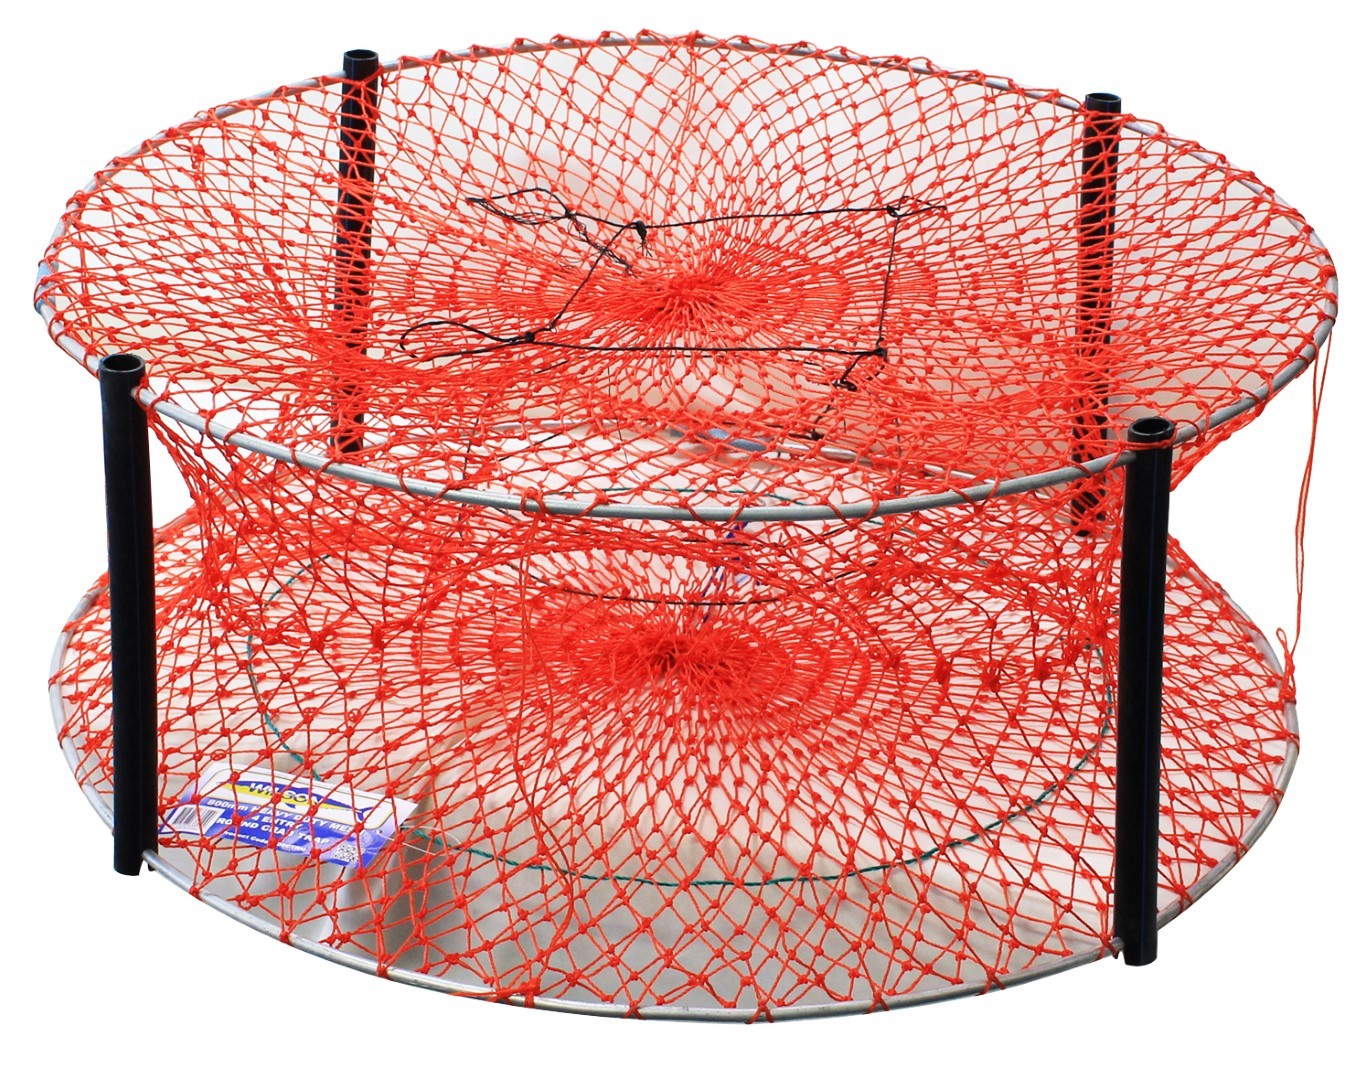 2 X Wilson Ready Rigged Wire Bottom Crab Nets- 2 Rings With